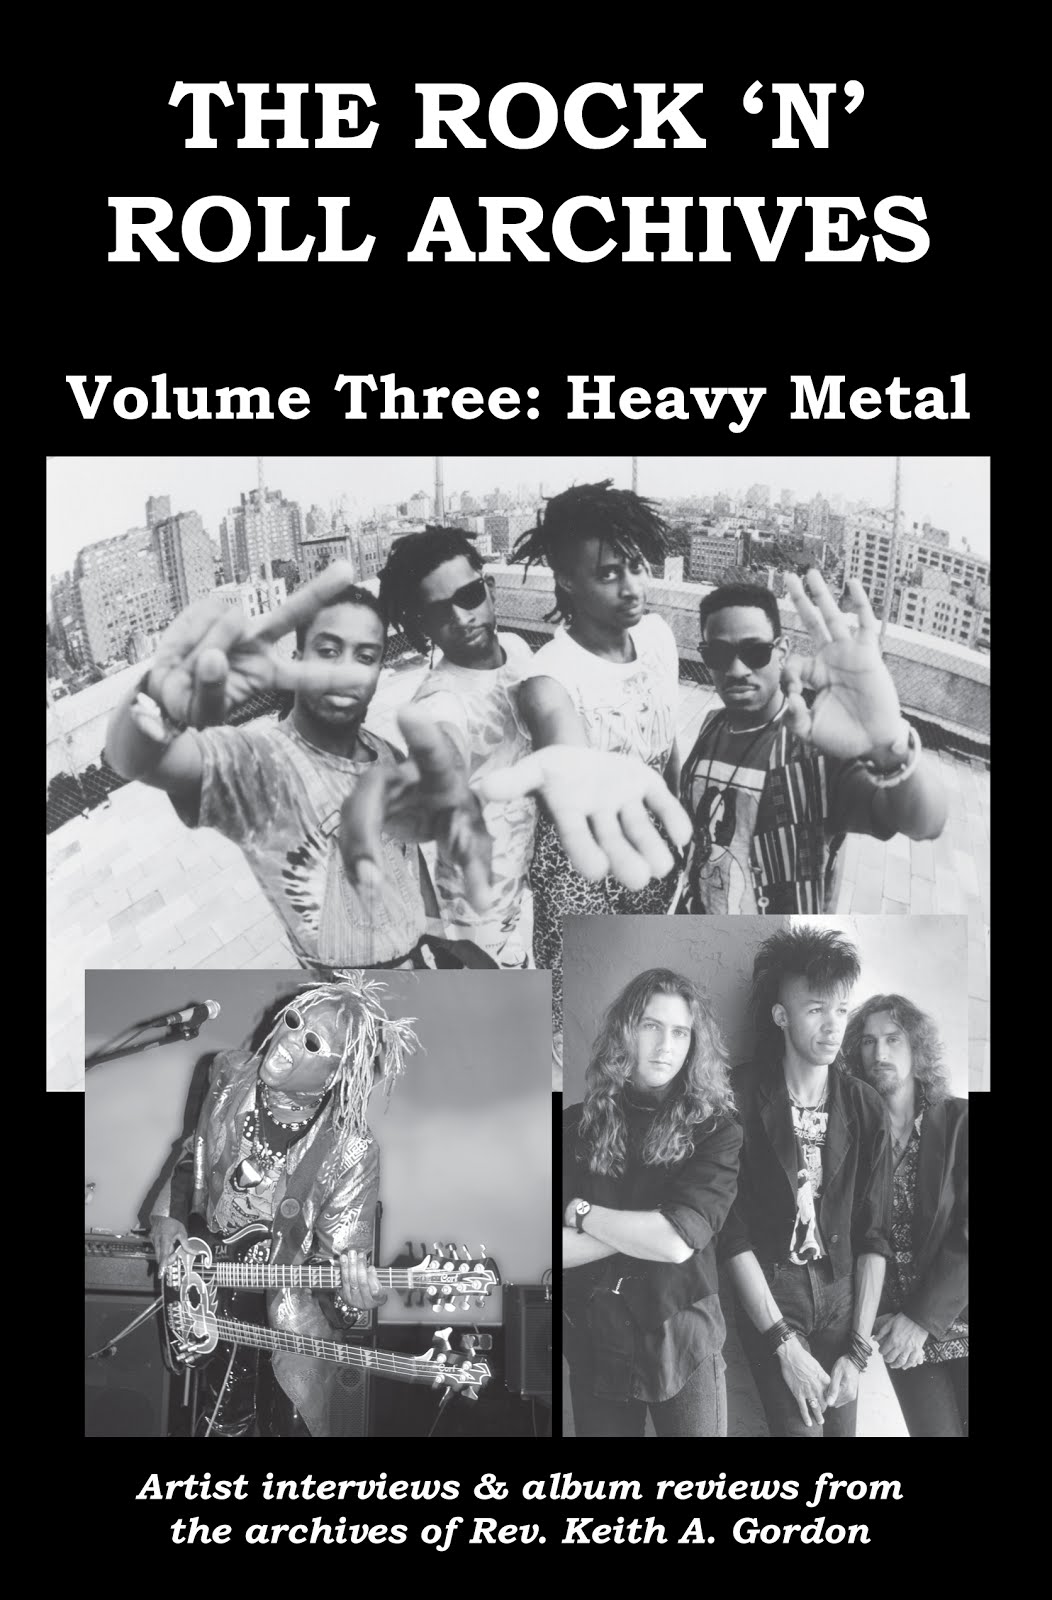 The Rock 'n' Roll Archives, Volume Three: Heavy Metal